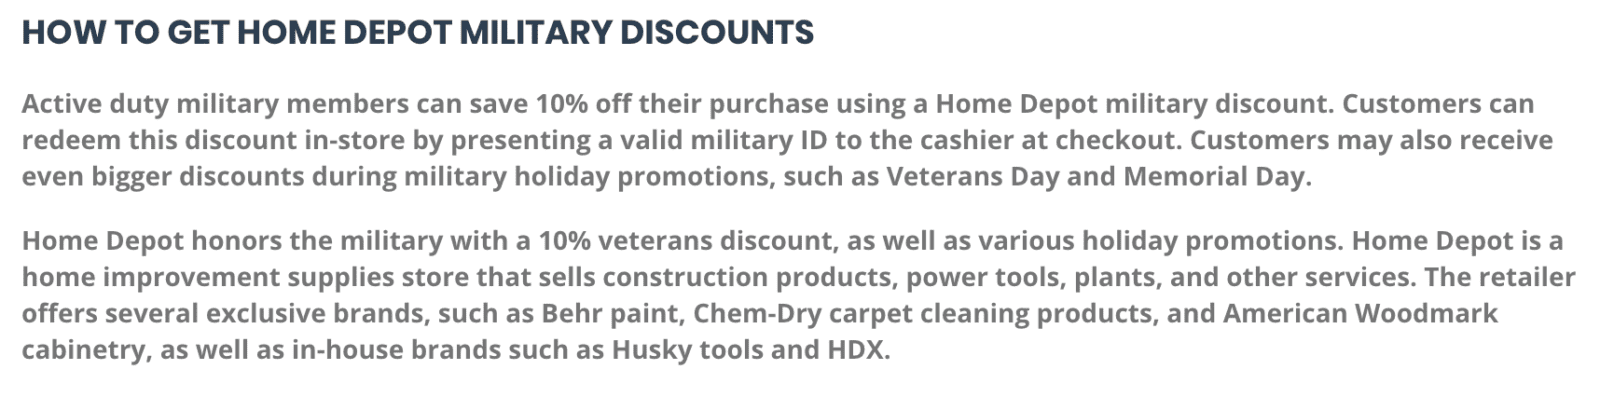 home-depot-military-discount-10-off-military-veteran-discounts